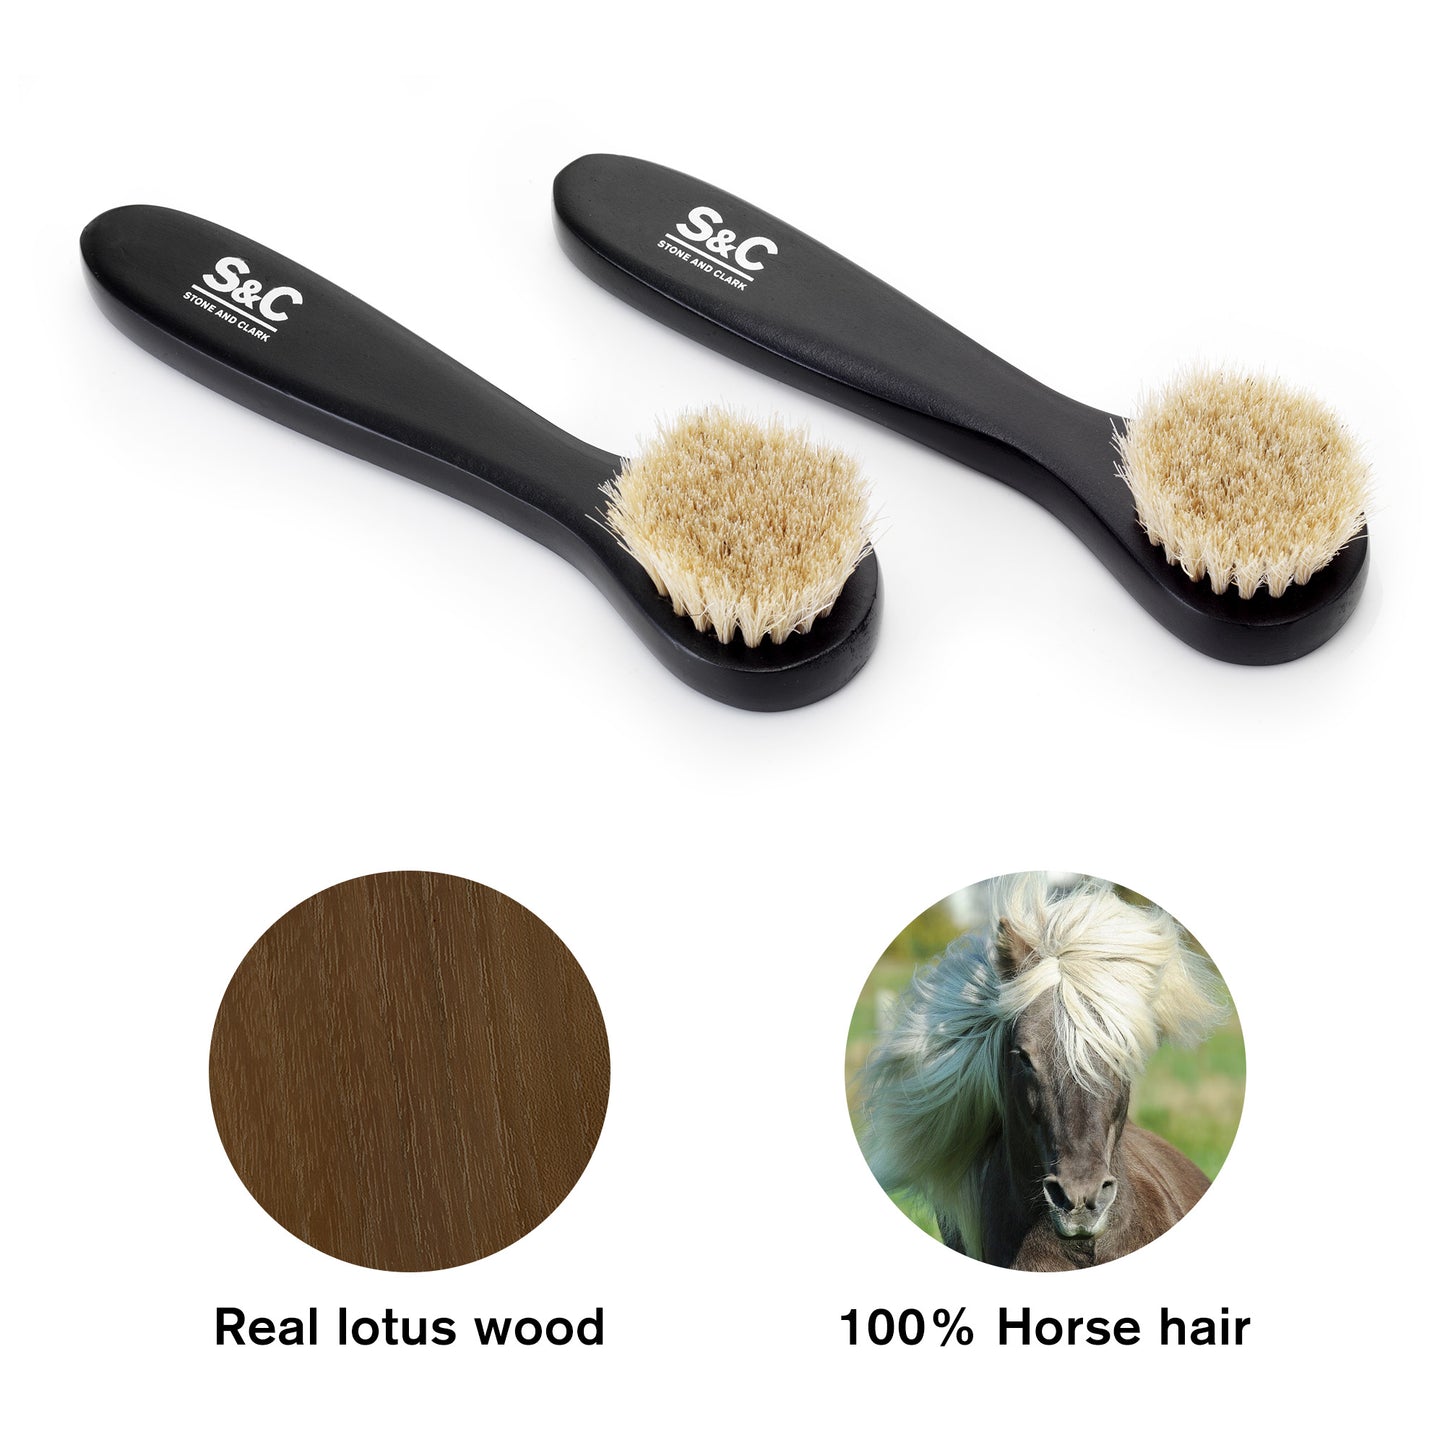 Stone and Clark Deluxe Horse Hair Shoe Brush Set - Brown